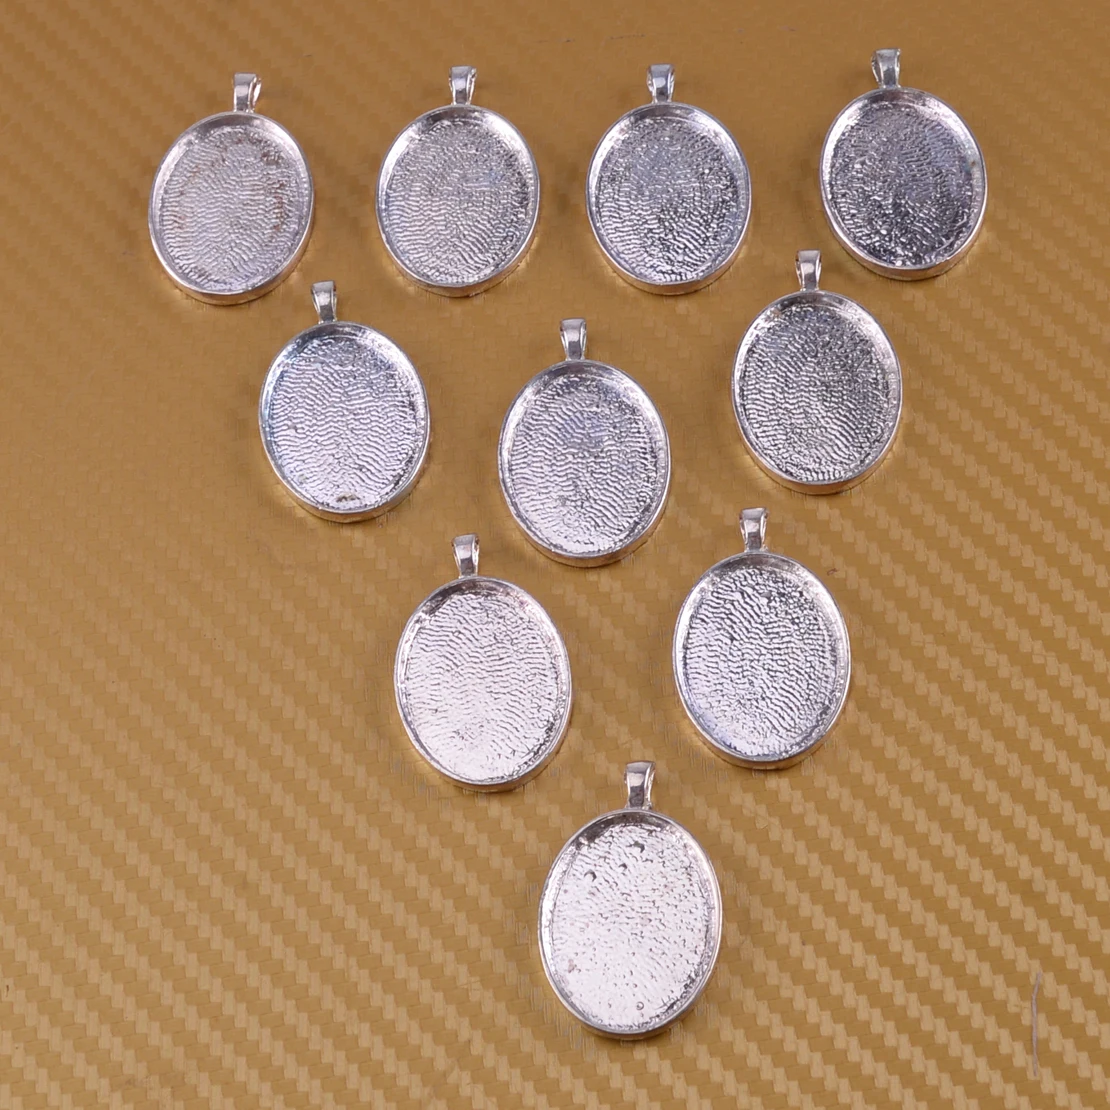 

New 10pcs 30mm Alloy Oval Pendant Tray Antique Silver Blank Bezel Base Charm For DIY Cabochon Setting Jewelry Making